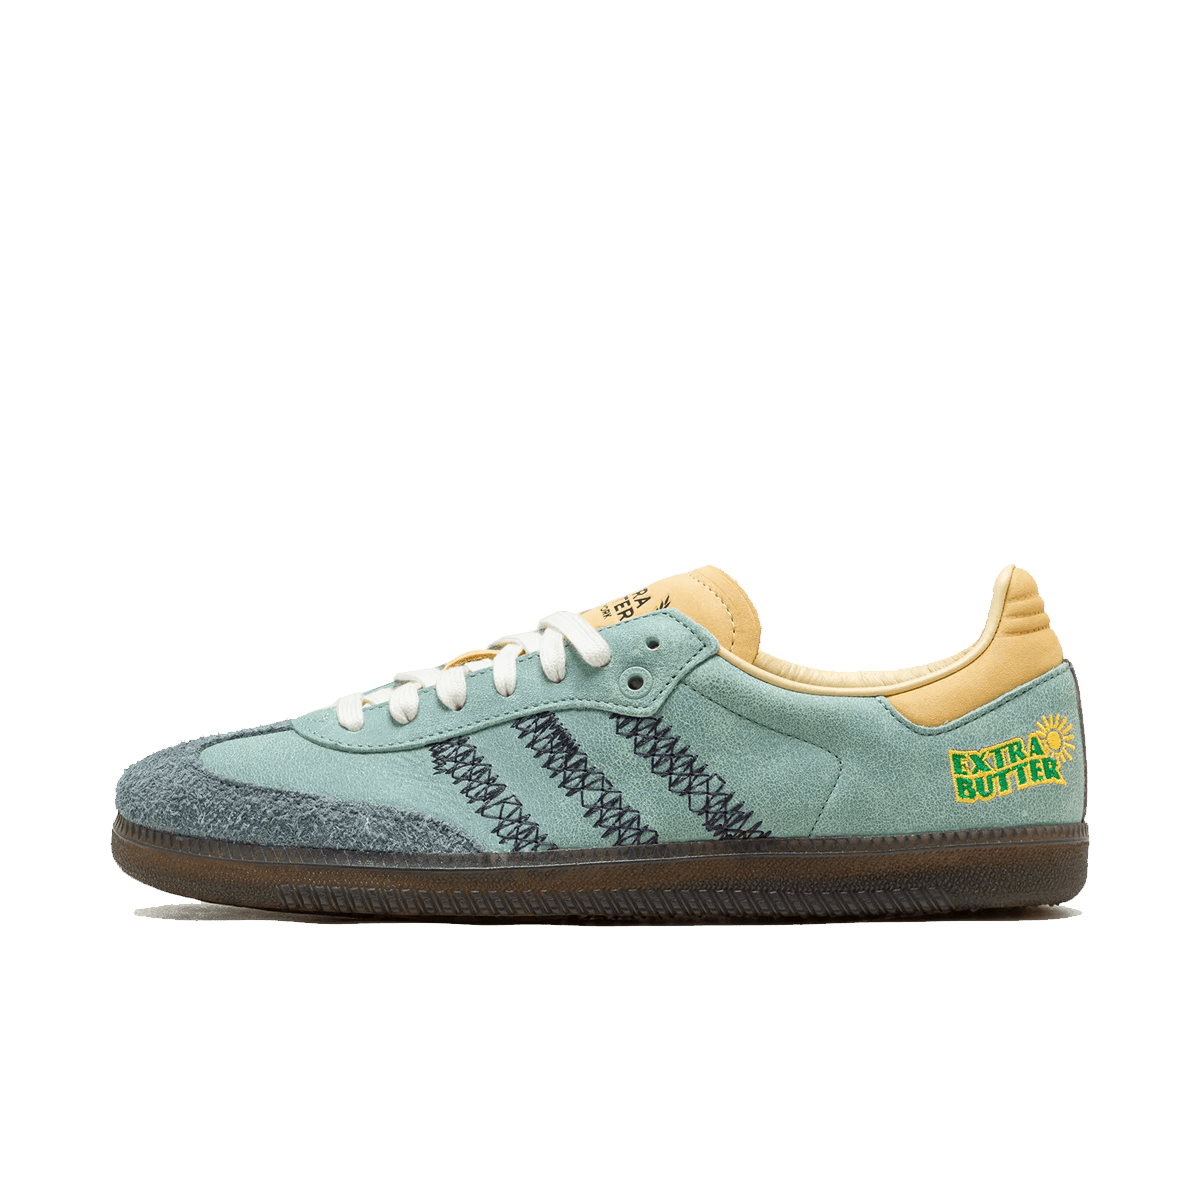 Extra Butter x adidas Samba 'Chalk White' - Consortium Cup IE0174